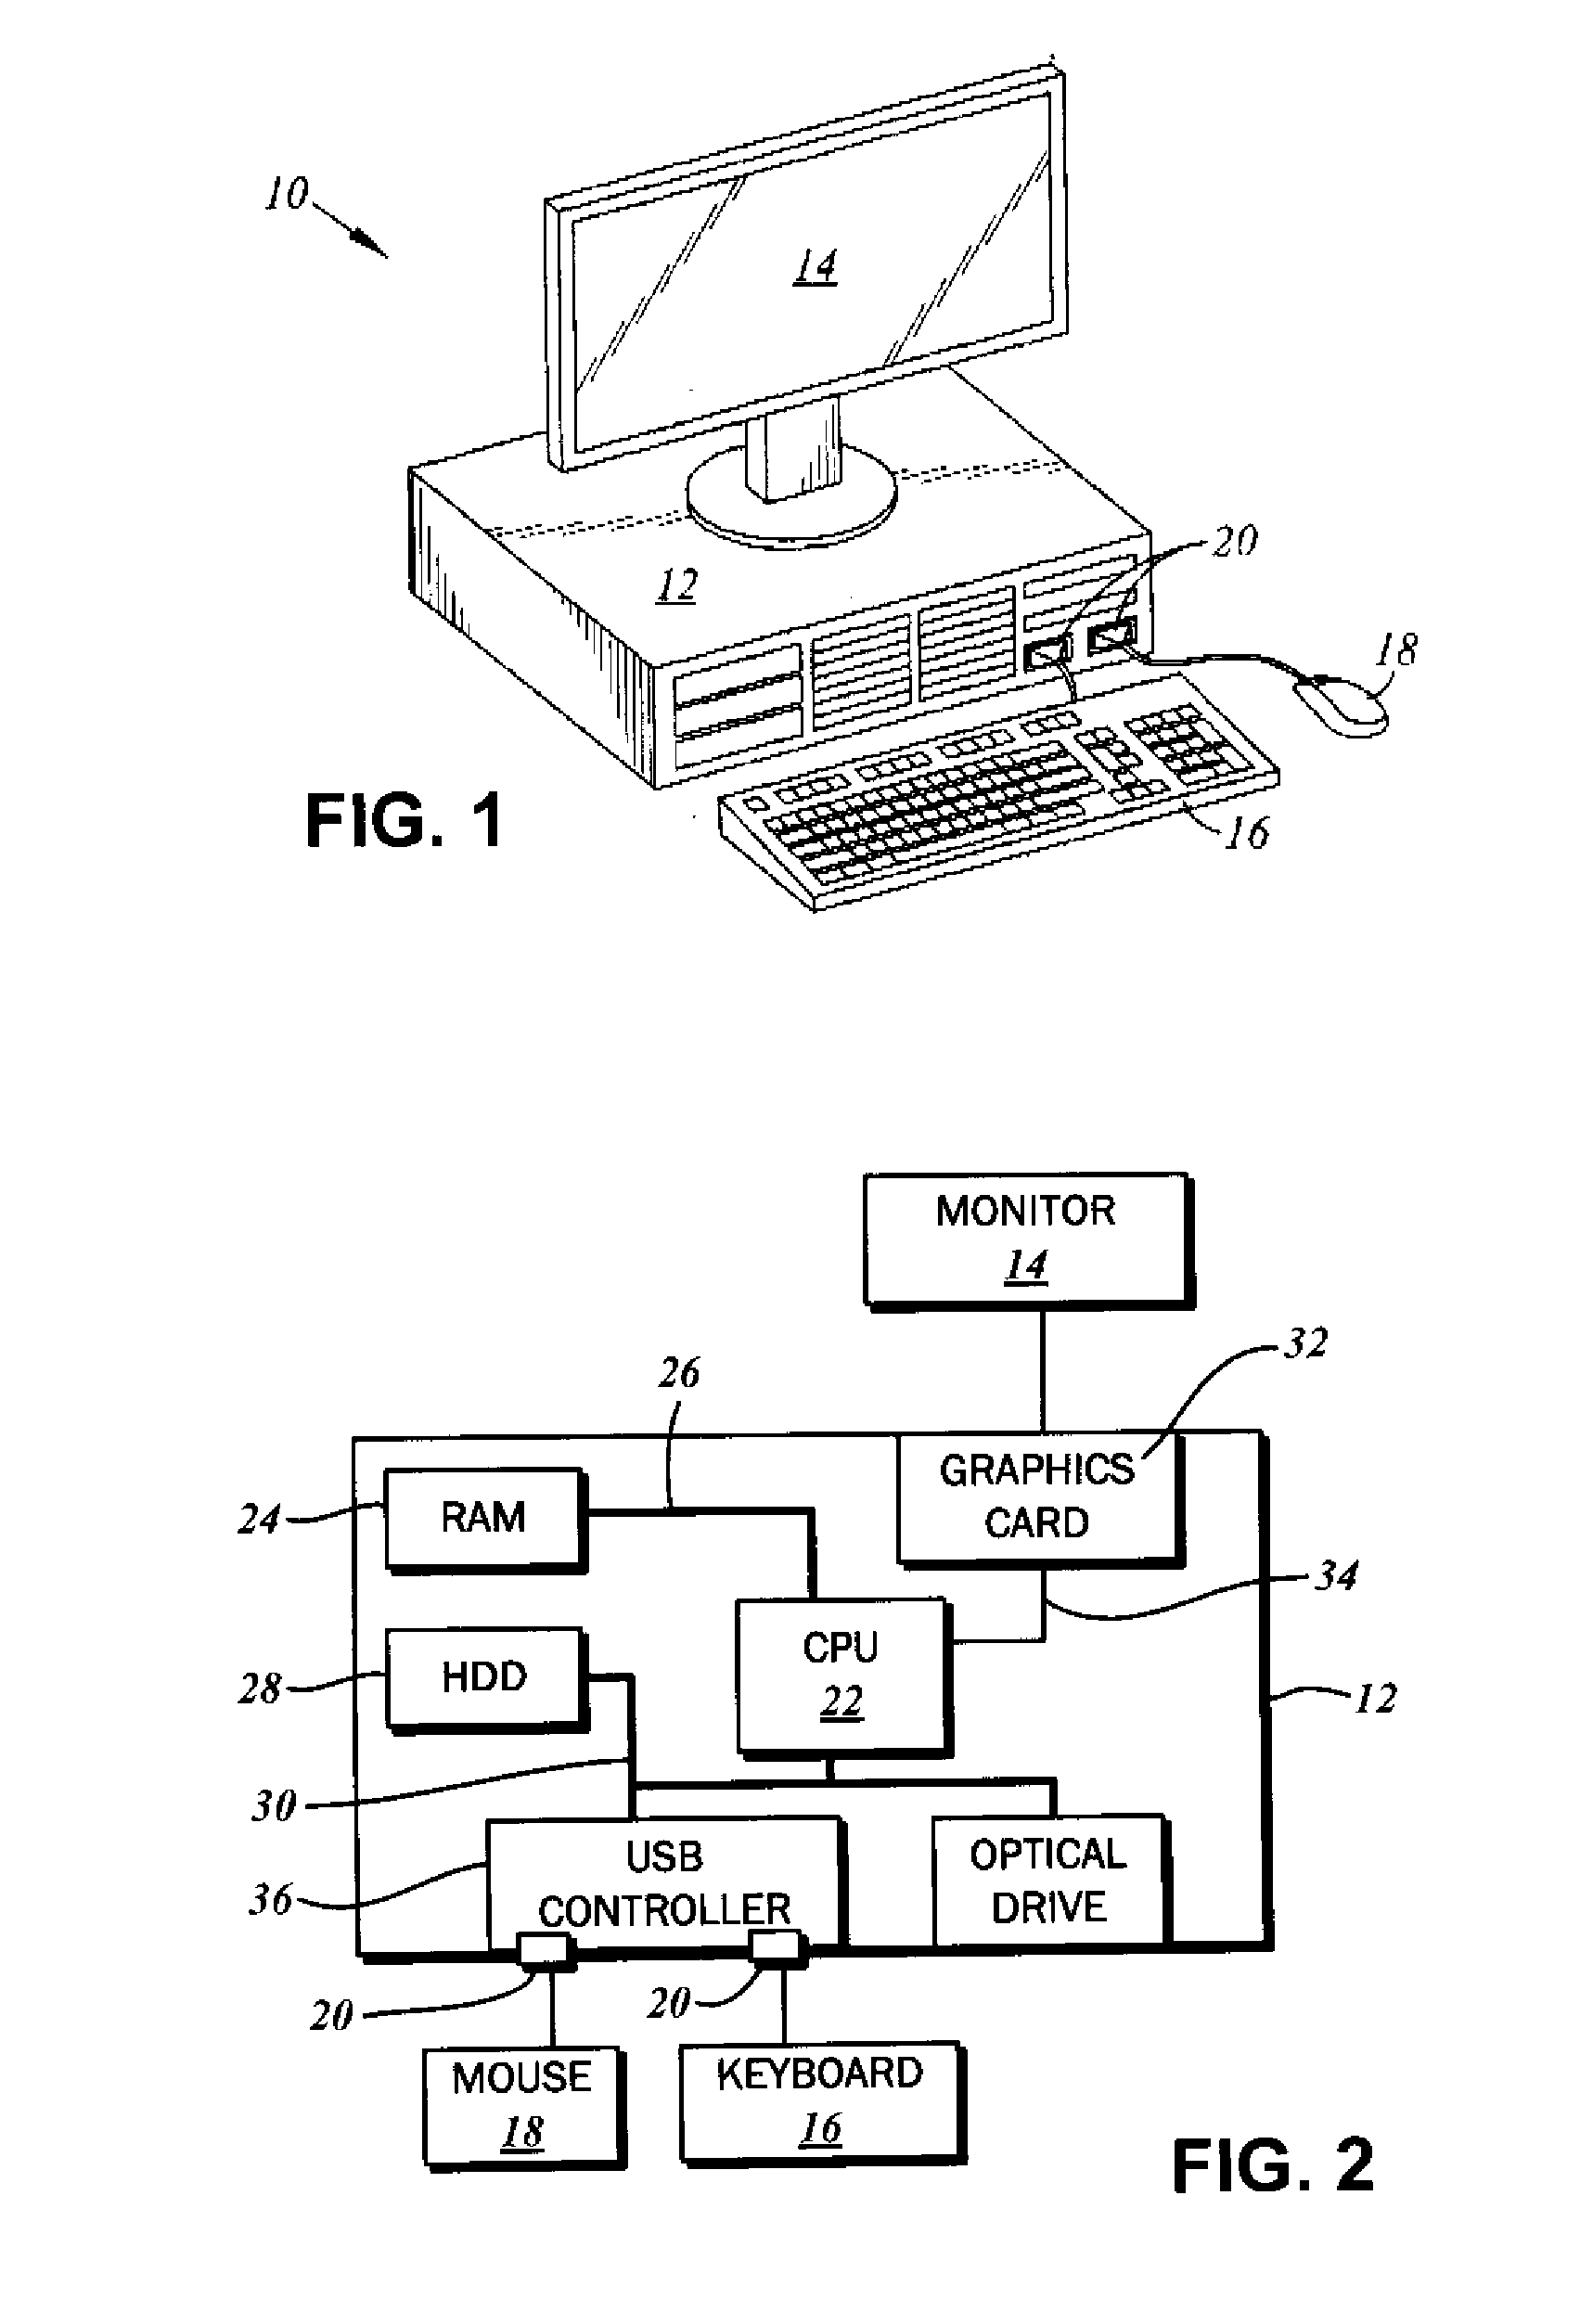 Method for Tracking Annotations with Associated Actions